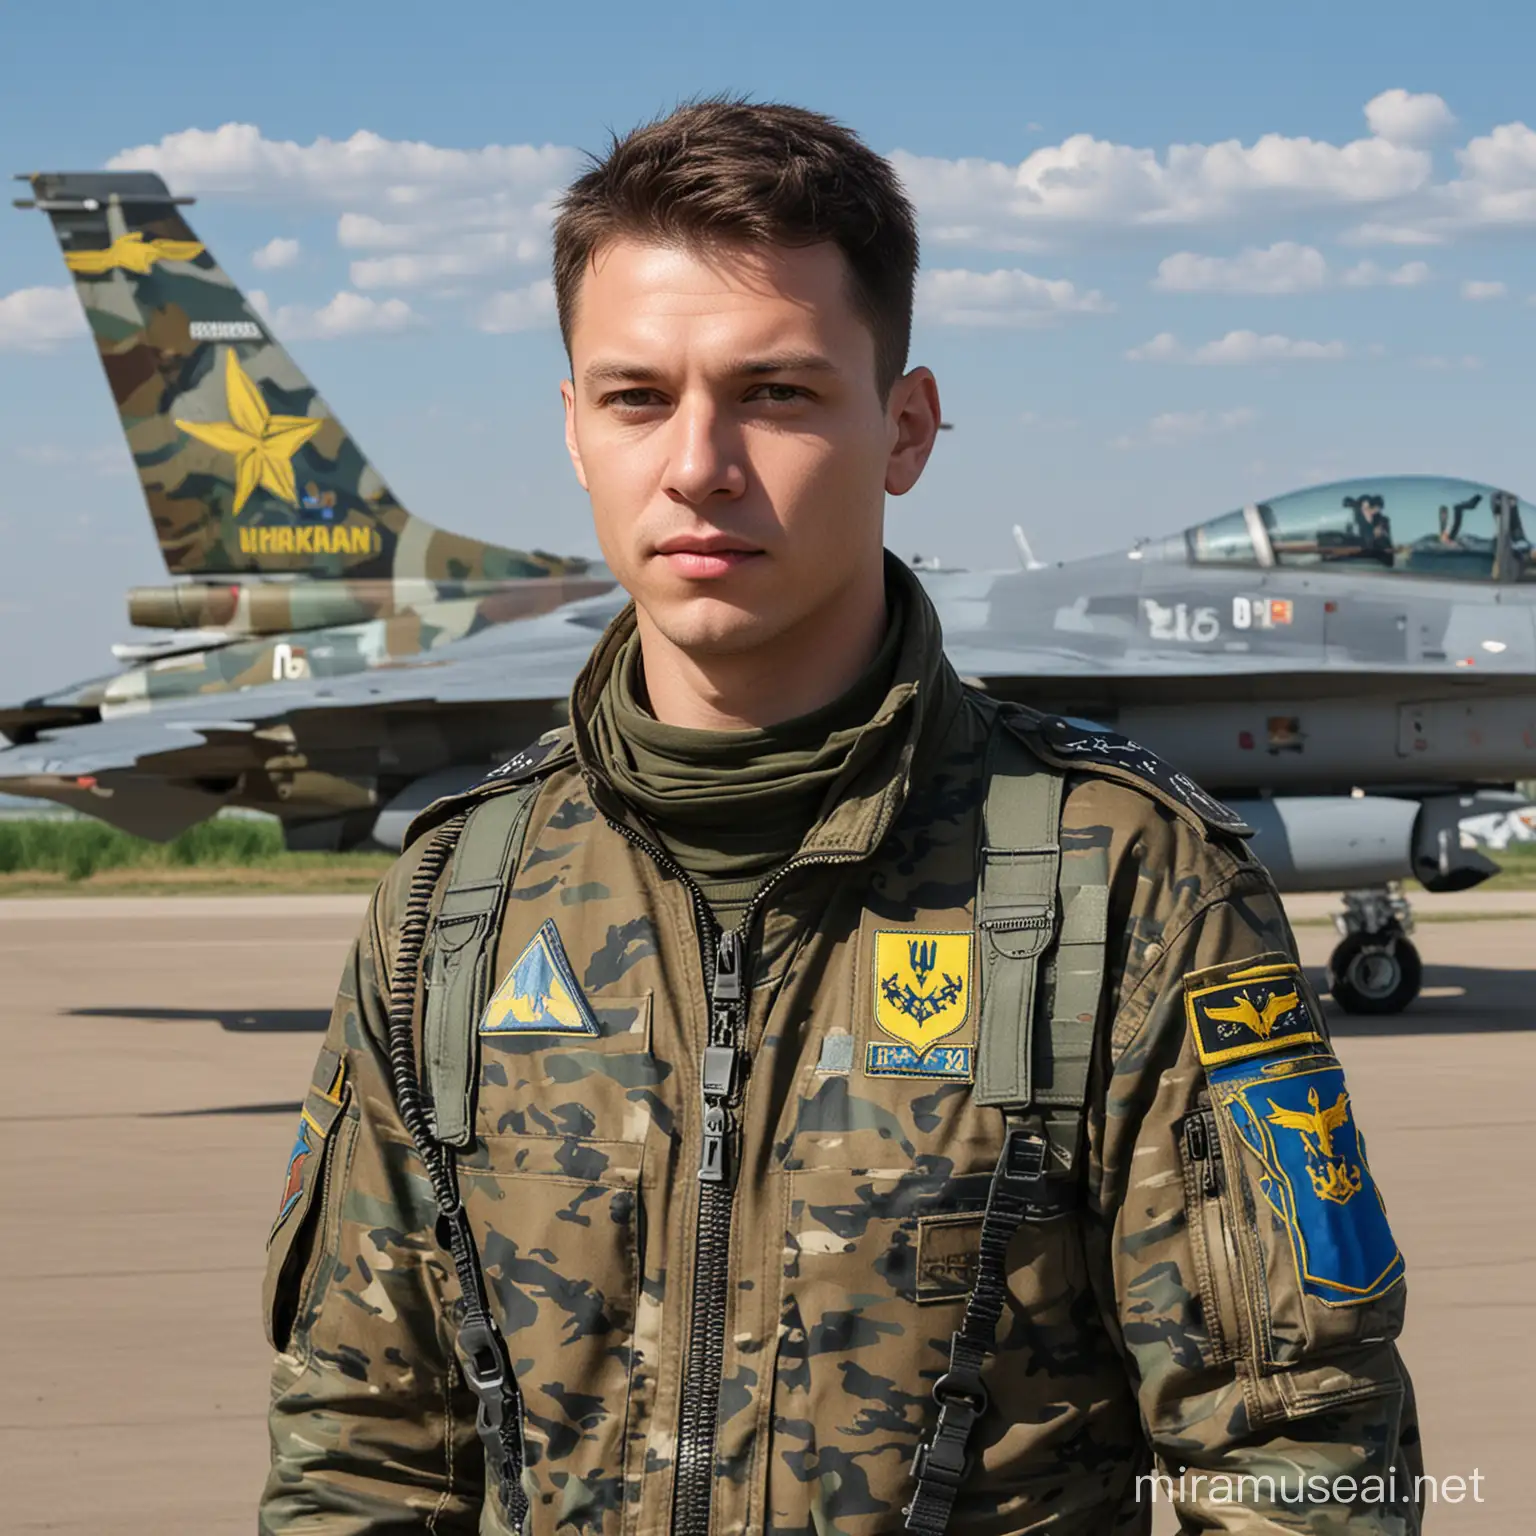 Ukrainian Pilot in Camouflage Uniform with F16 Aircraft